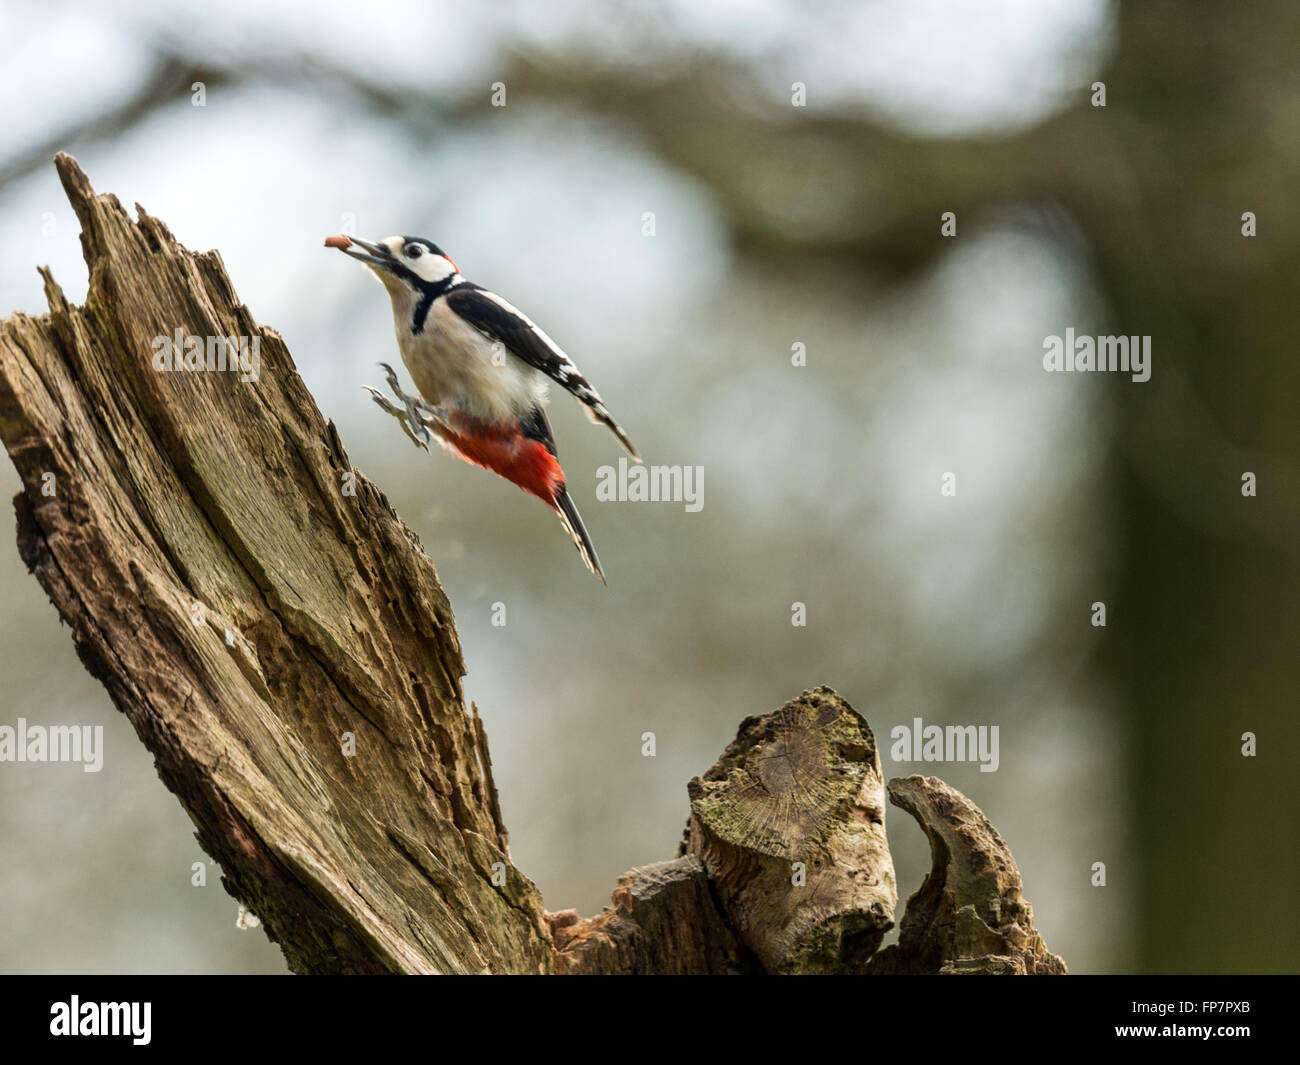 Single Great Spotted Woodpecker (Dendrocopos major) foraging in a natural woodland countryside setting. Airborne carrying food. Stock Photo